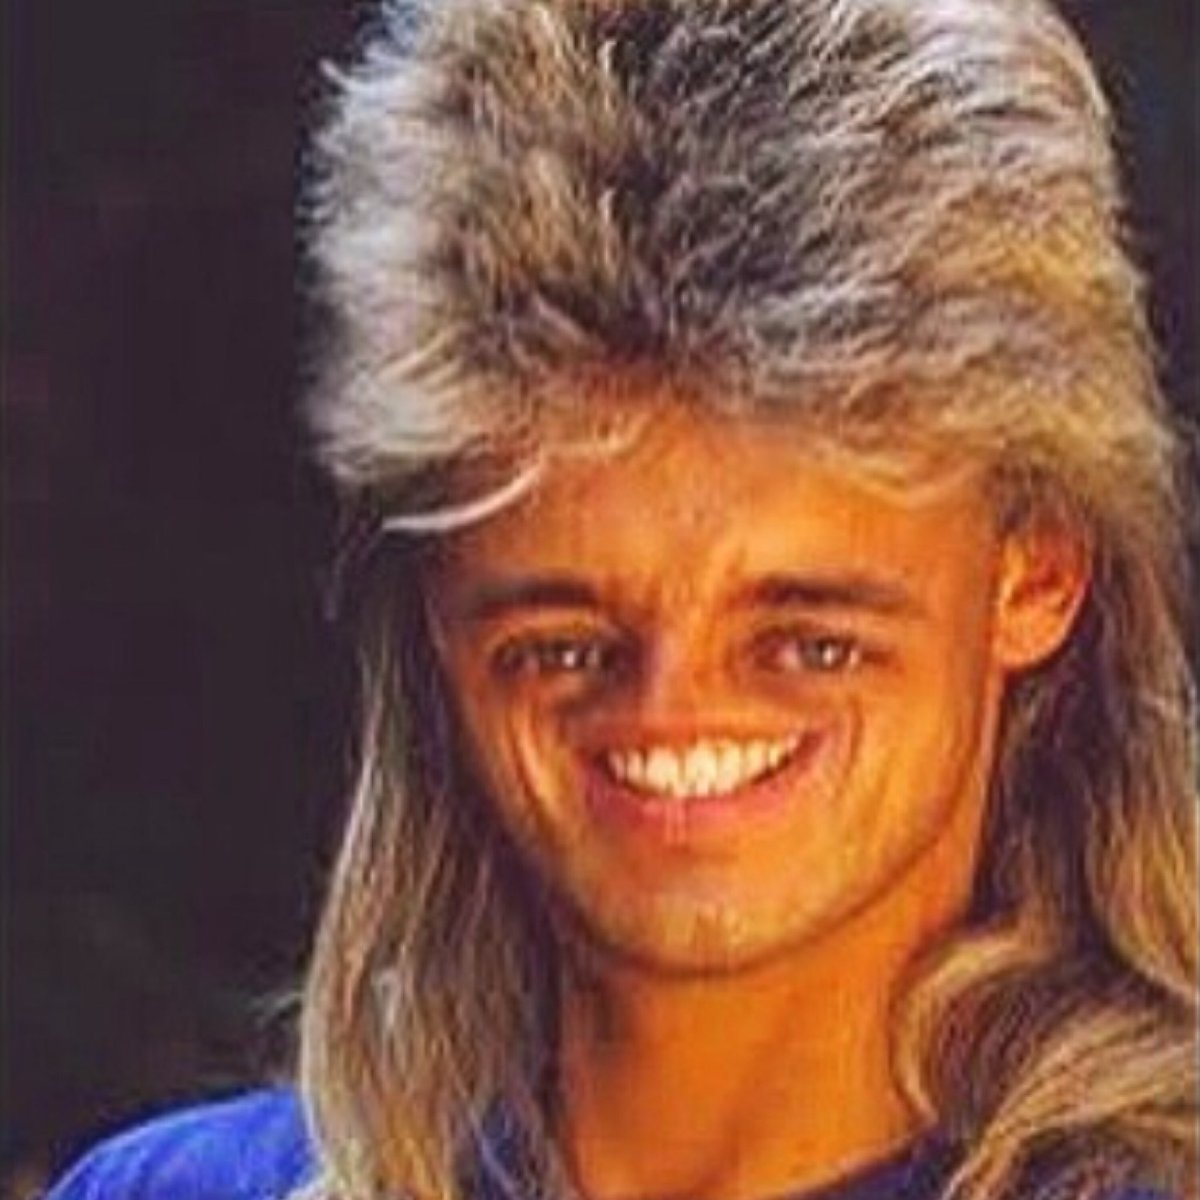 Who remembers when @patsharp looked like this? #goodtimes #festival #life #funhouse #patsharp #instagood #uk #funny #picoftheday #hot #mullet #djcounselling#truelove #fresh #love #dance #lol #newmusic #funnypic #classic #instadaily #jokes #haircut #comedy #besthaircut